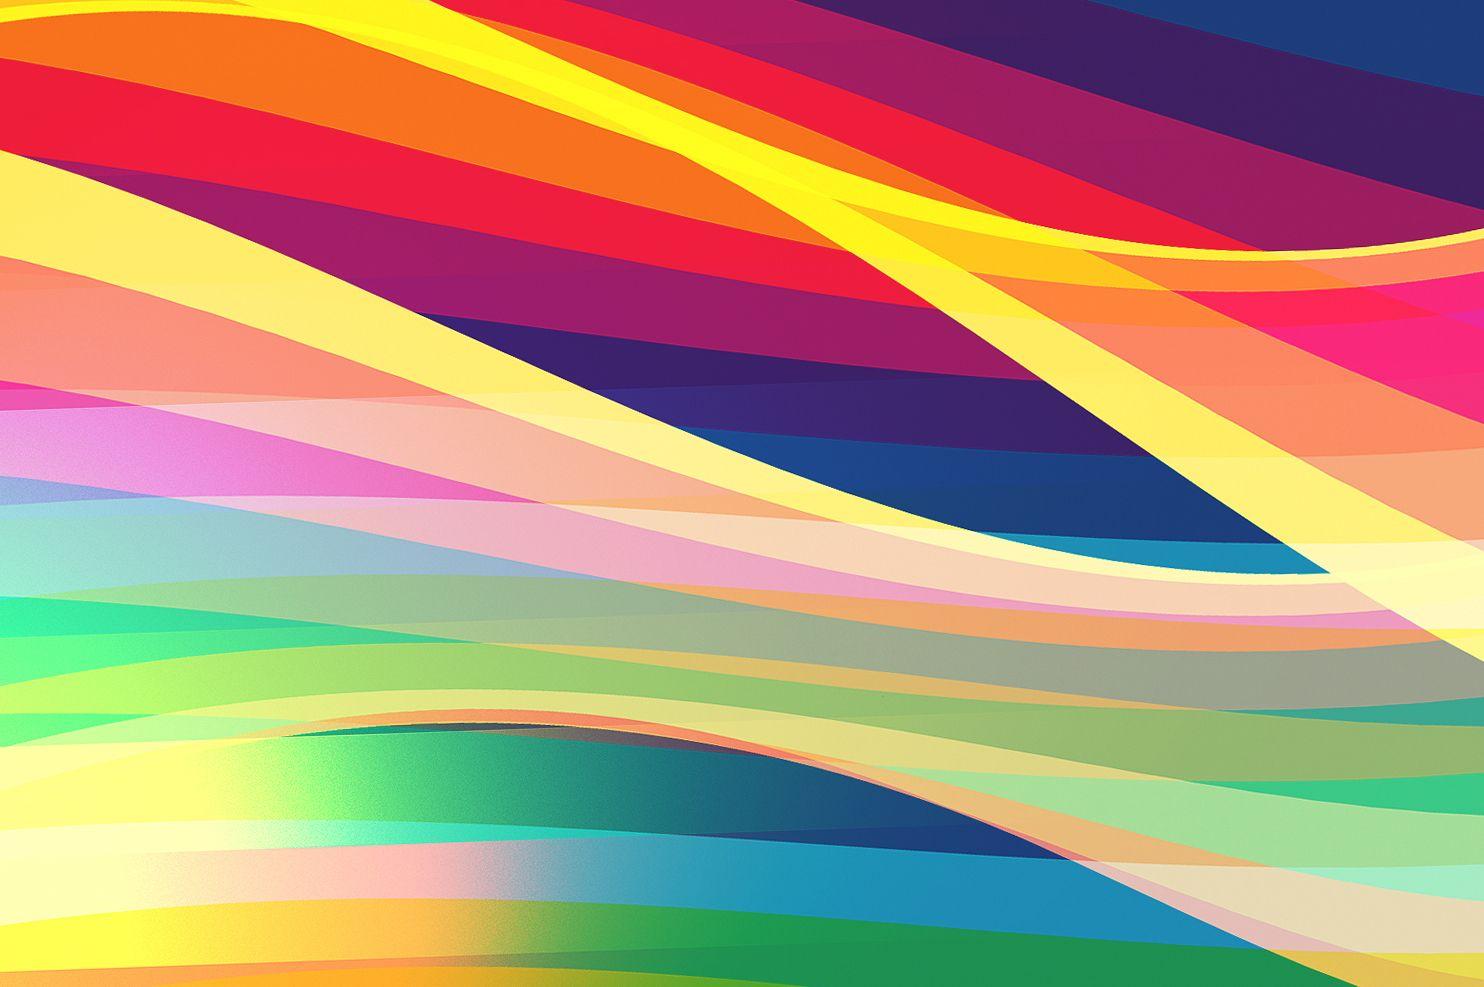 Hd Abstract Wallpaper, Colorful Background, Widescreen Image